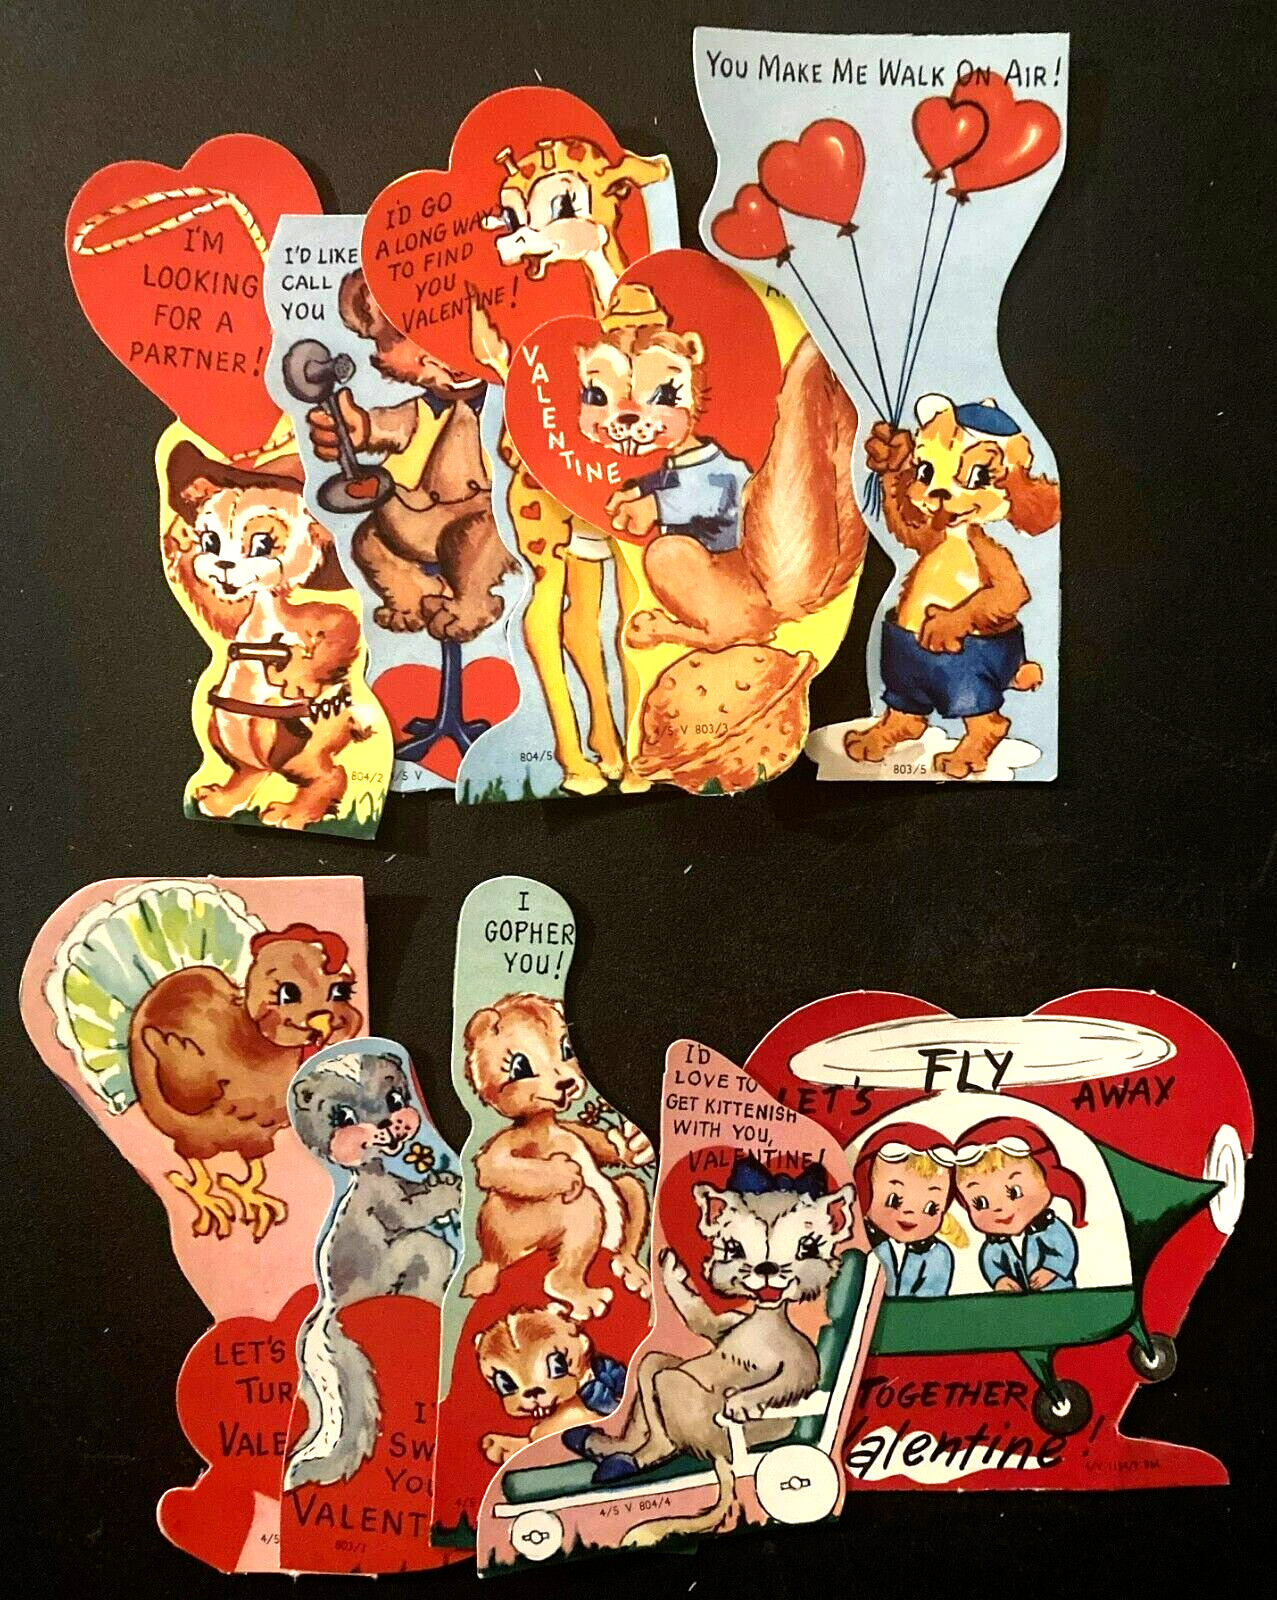 Charming Lot of 10 Small Die-Cut Vintage Childrens Valentines-1950s for Kids